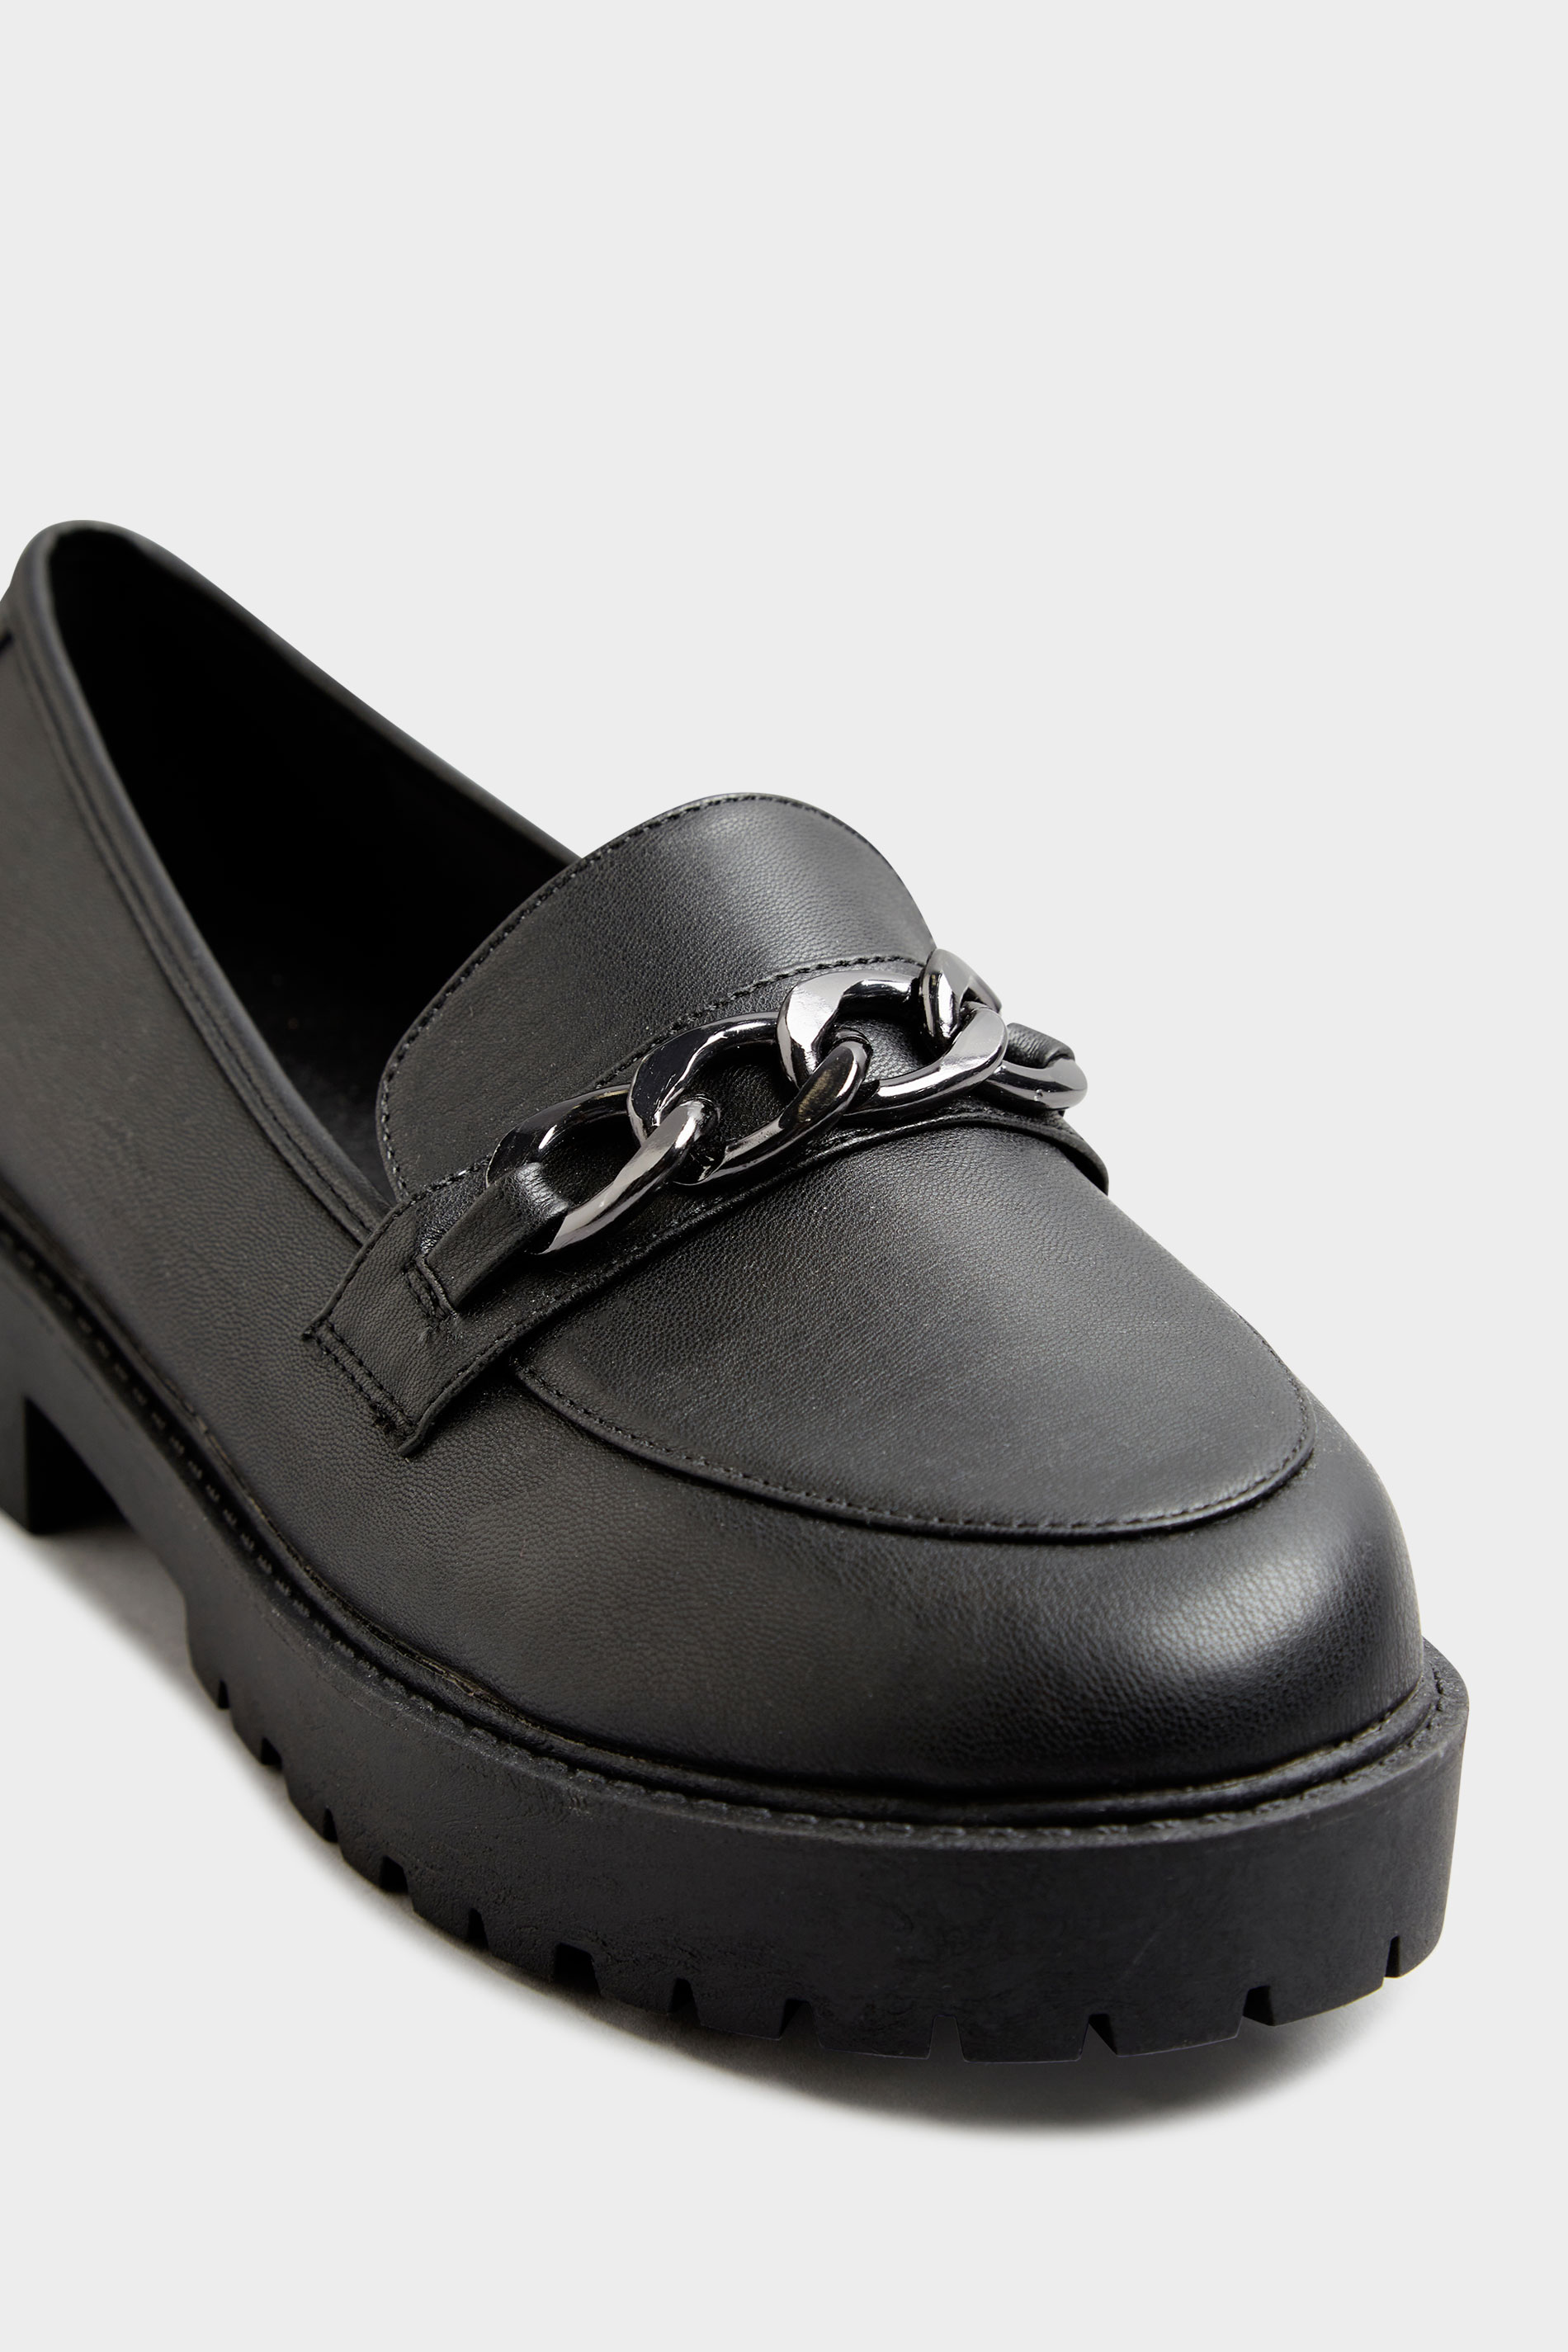 LIMITED COLLECTION Black Chunky Loafers In Extra Wide Fit | Yours Clothing